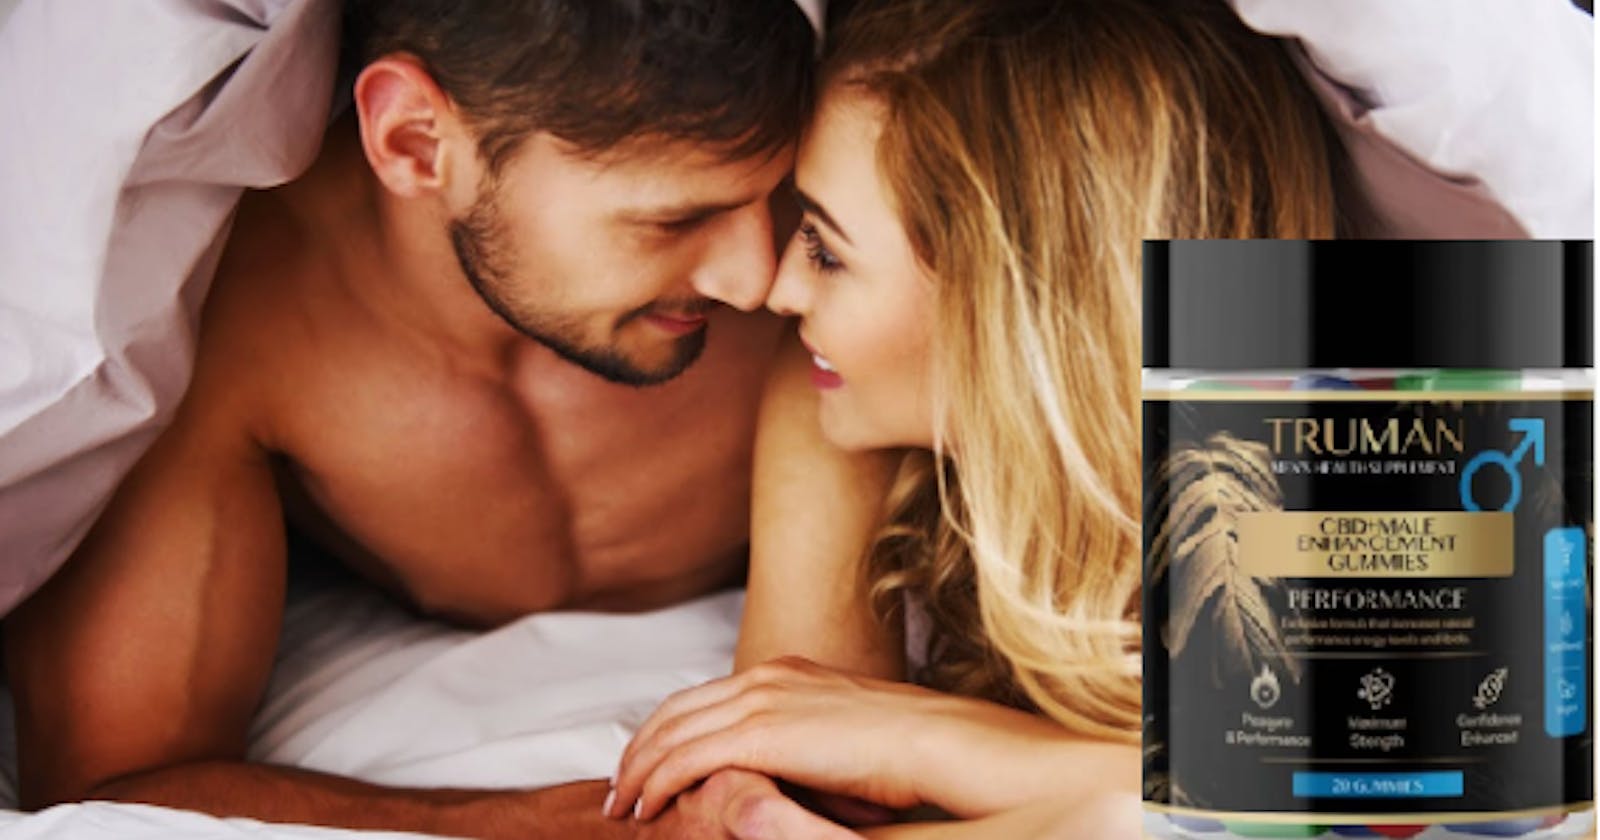 Evaxatropin Male Enhancement Price & Benefits? Is it a scam or effective?